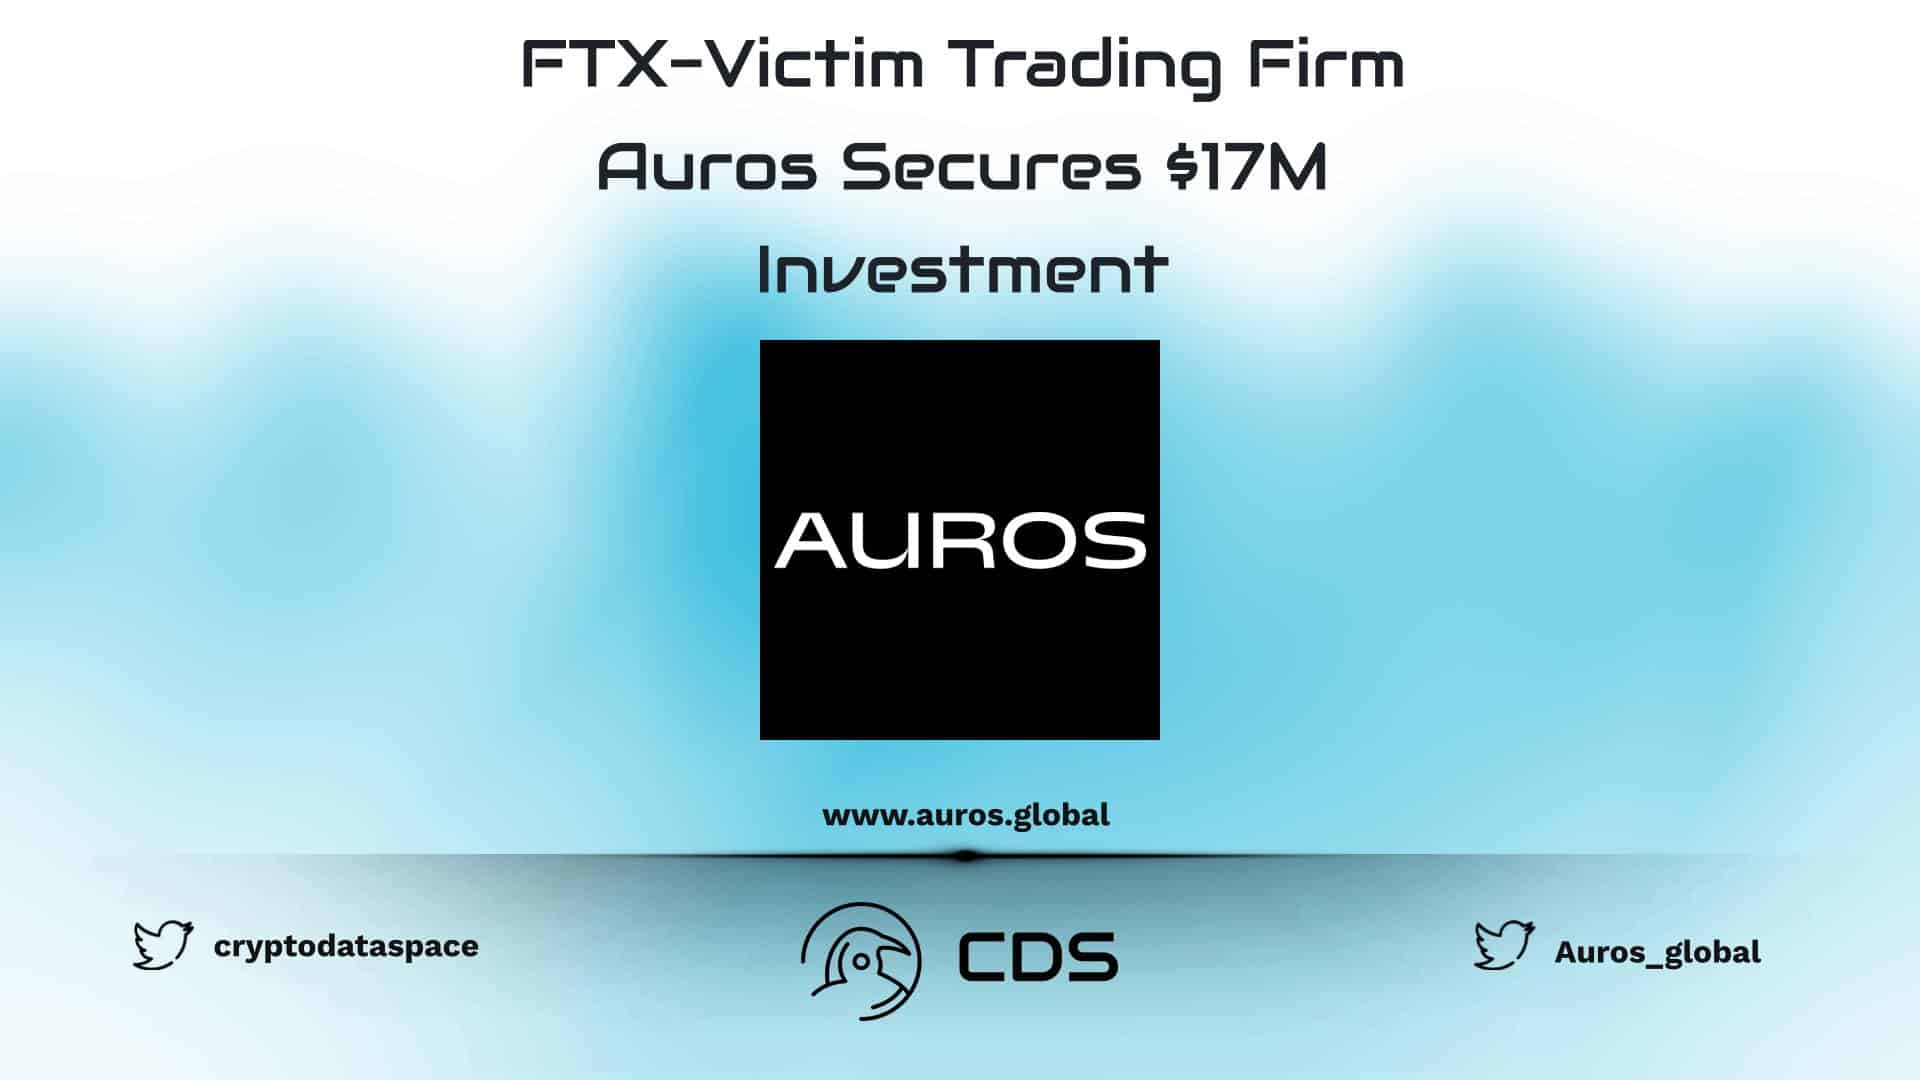 FTX-Victim Trading Firm Auros Secures $17M Investment